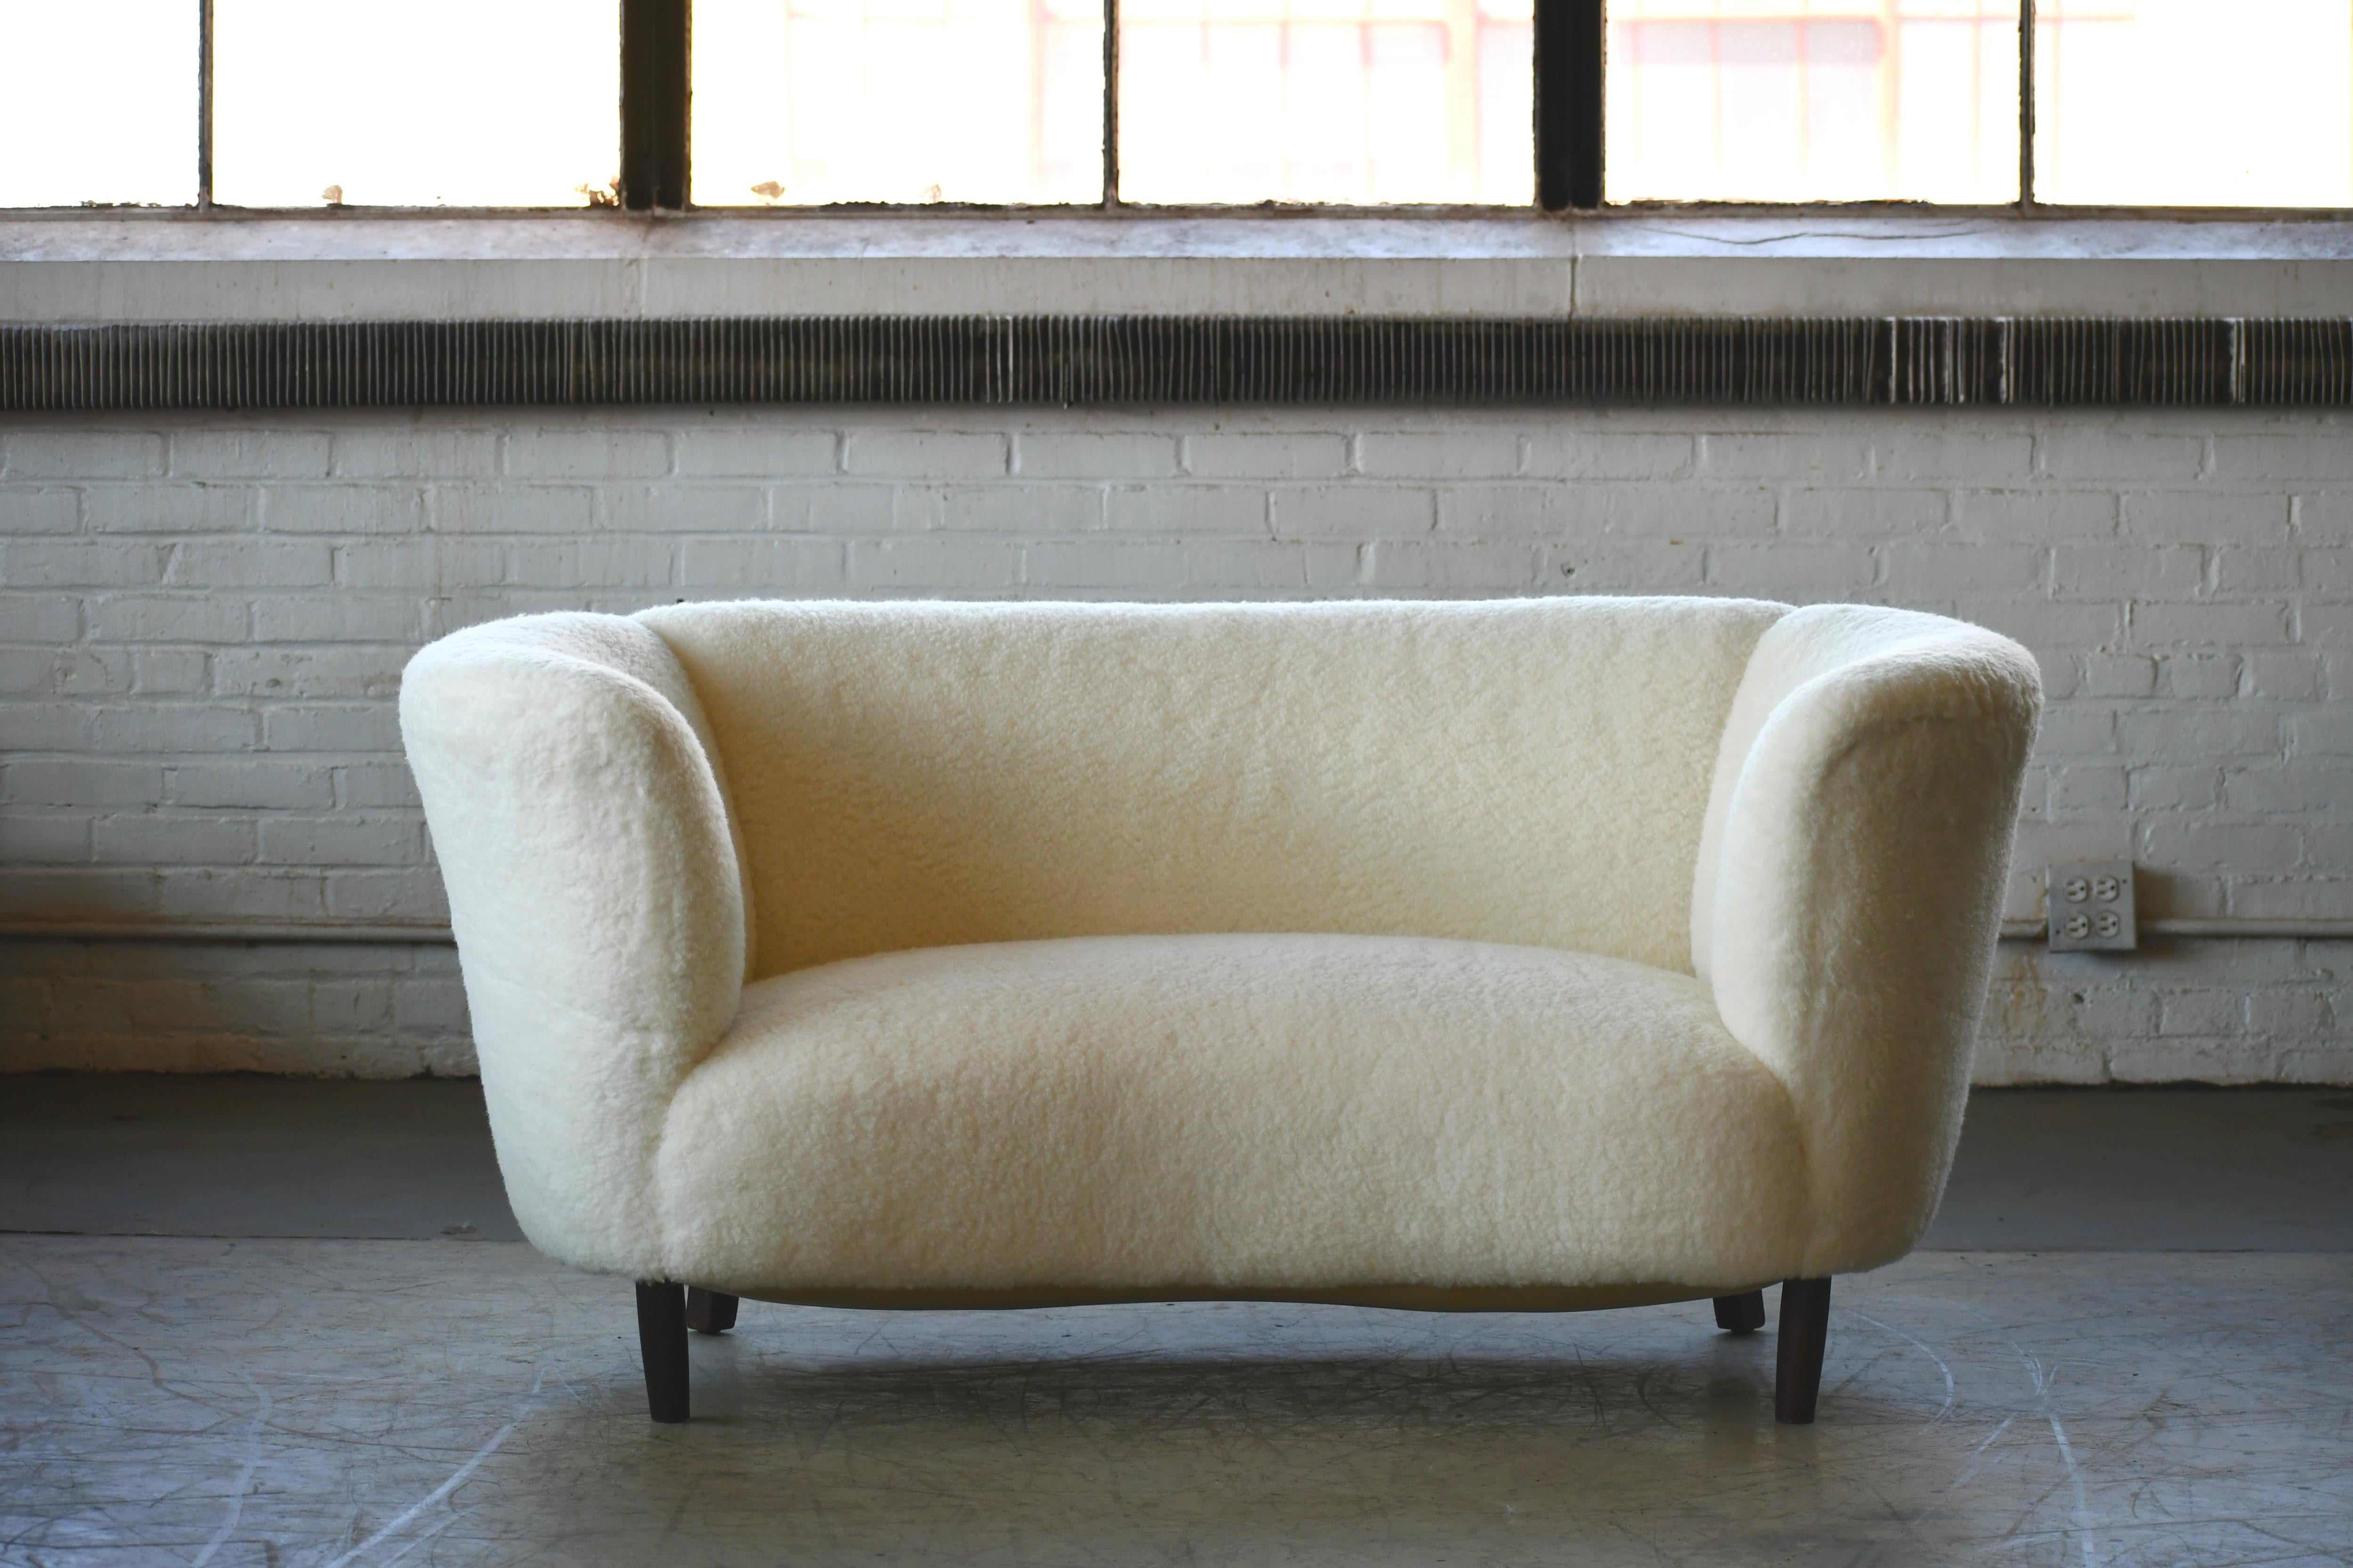 Banana shaped Viggo Boesen style curved two-seat sofa or loveseat, made in Denmark in the 1940s. This exuberant loveseat or sofa will make a strong statement in any room. Beautiful round organic lines that fully envelopes you in comfort. Fully